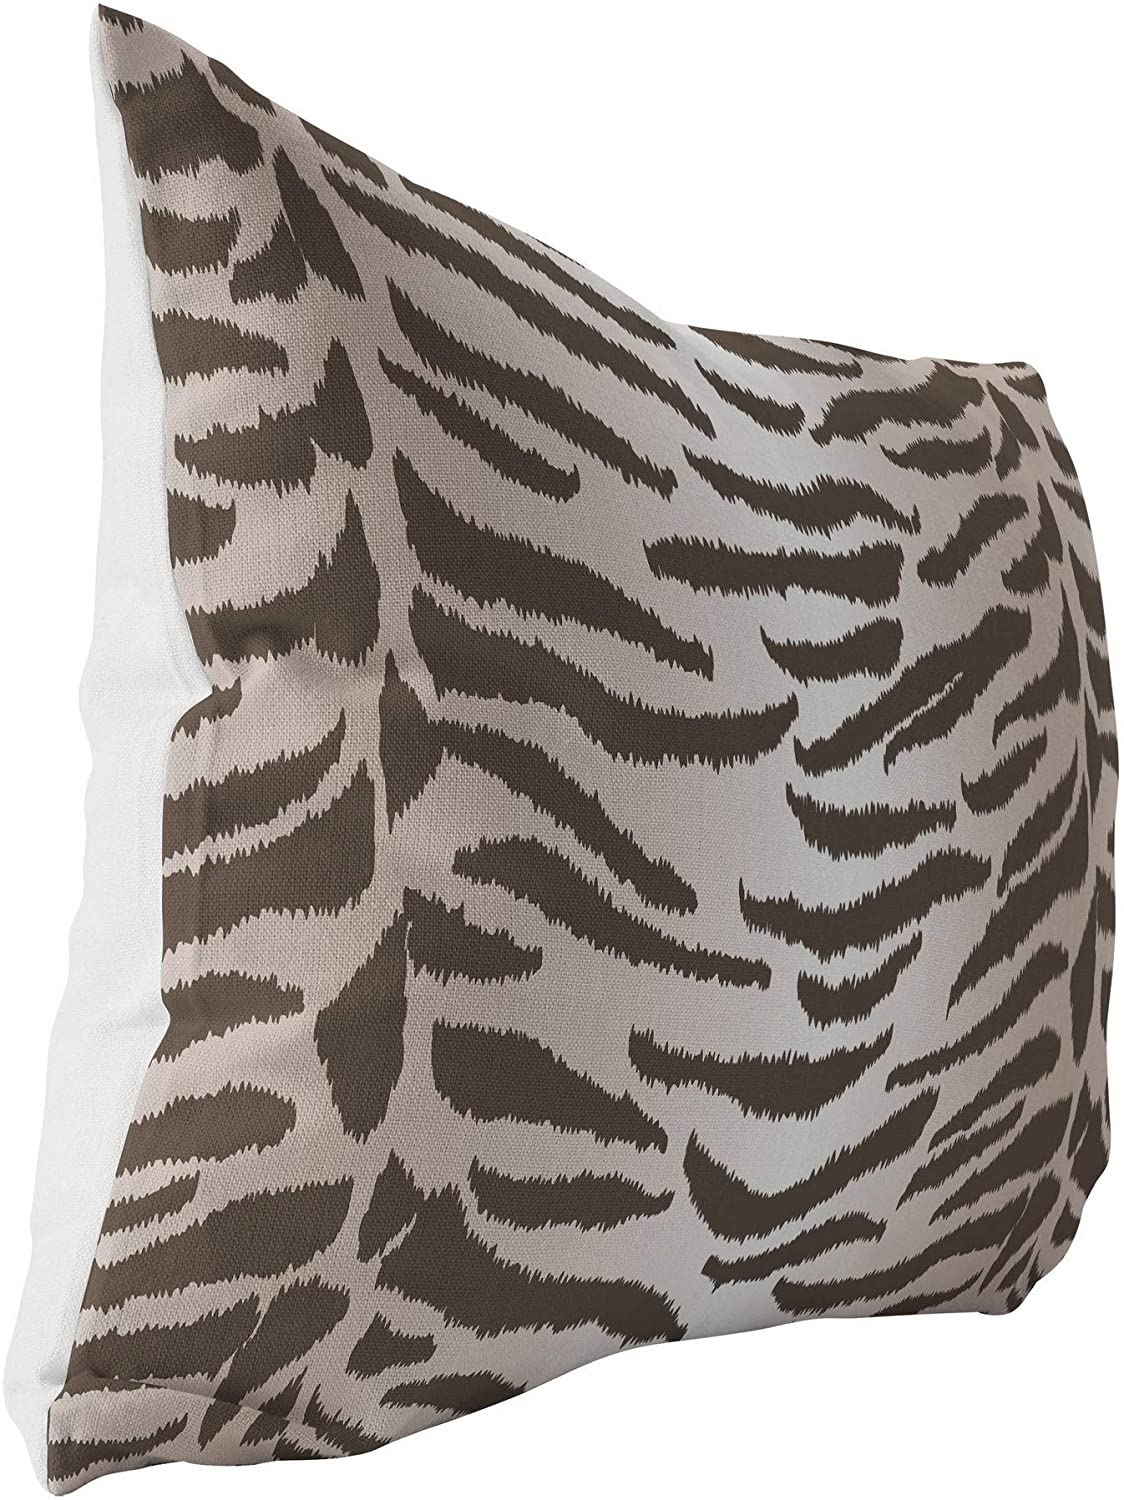 Tiger Brown Indoor|Outdoor Lumbar Pillow by Designs 20x14 Tan Floral Modern Contemporary Polyester Removable Cover